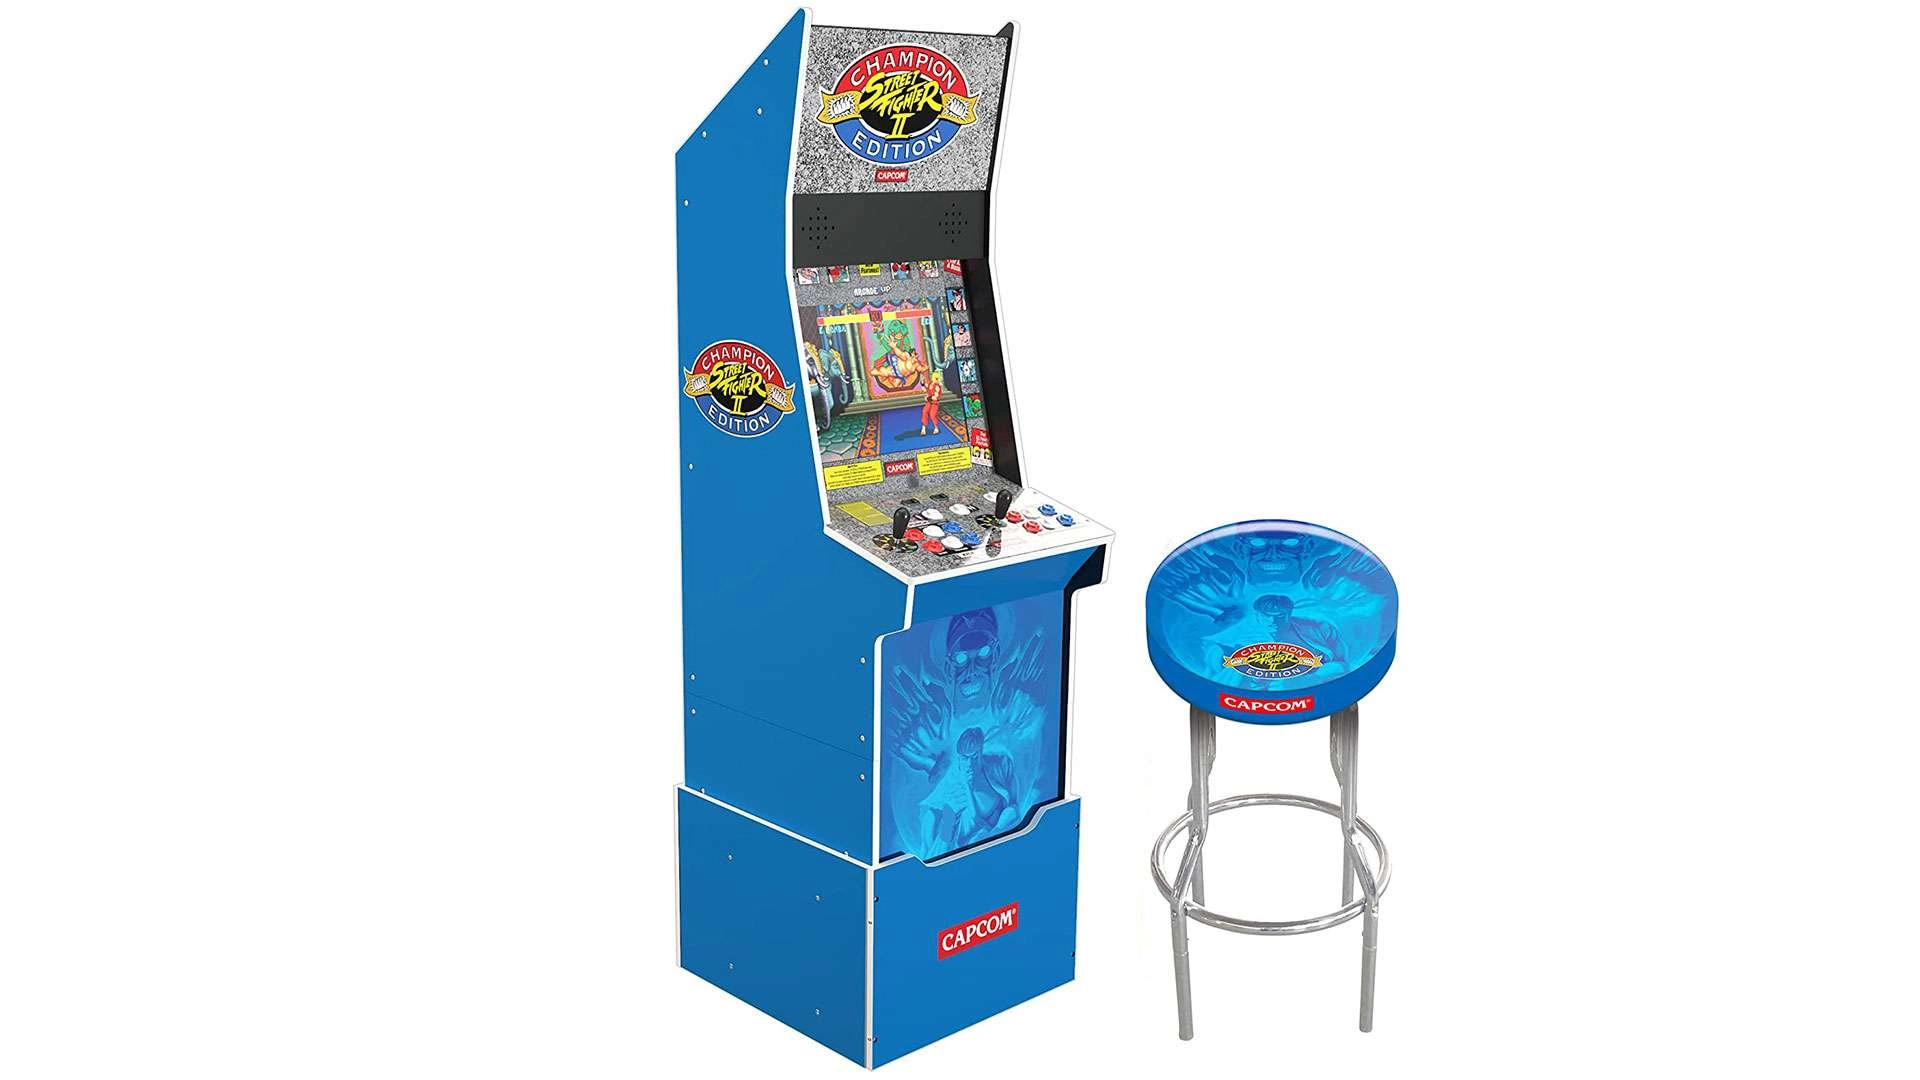 Street Fighter II Champion Edition Arcade Cabinet and Stool